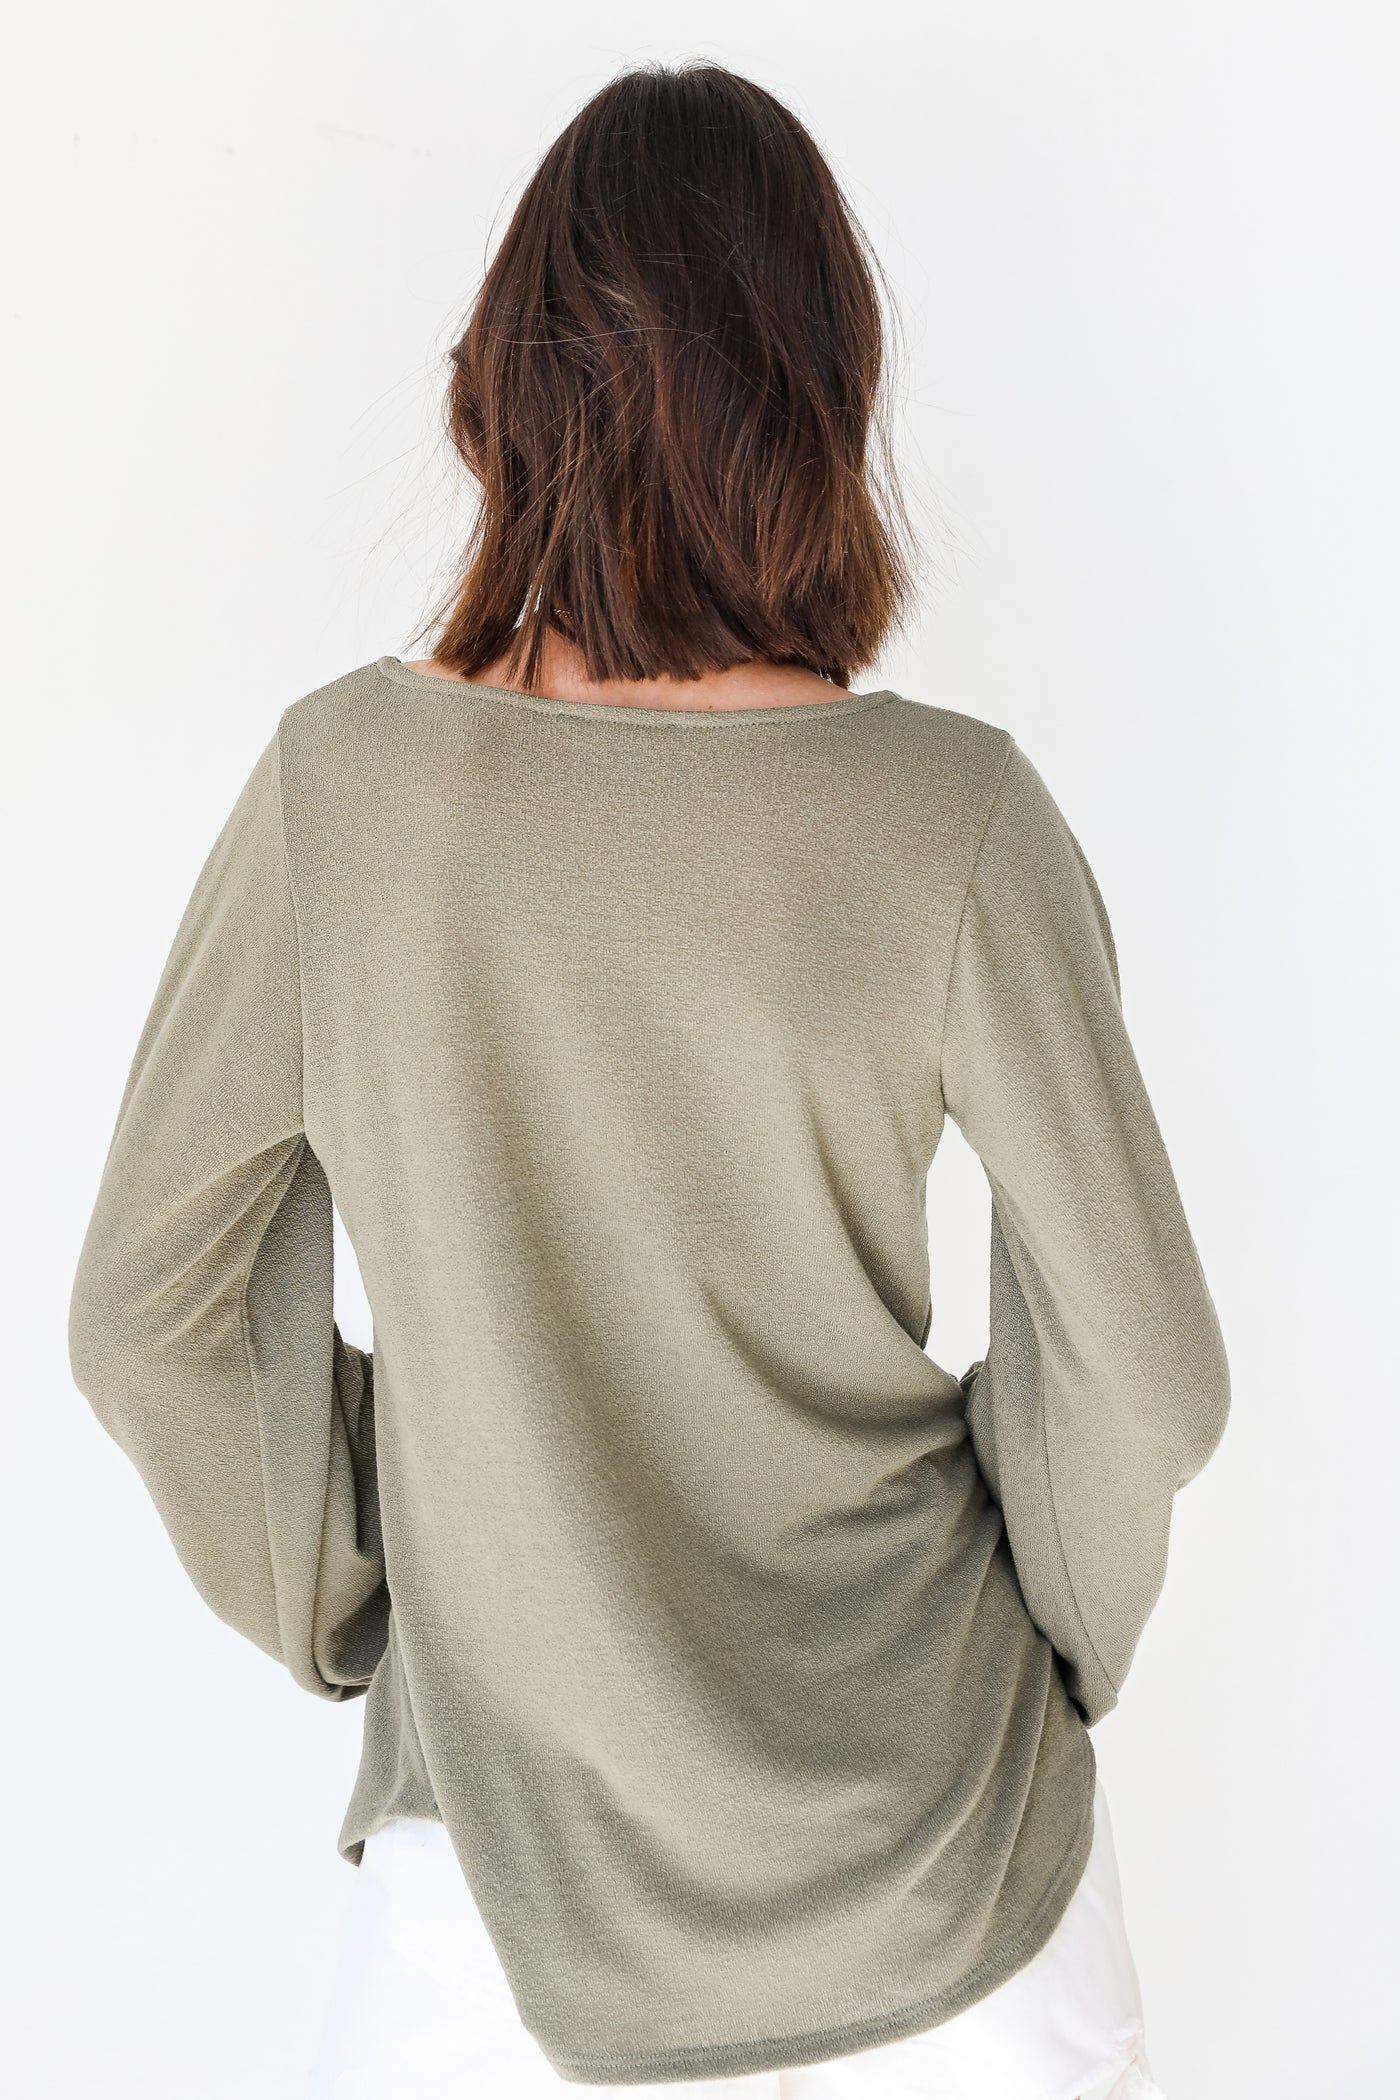 Knit Top in olive back view